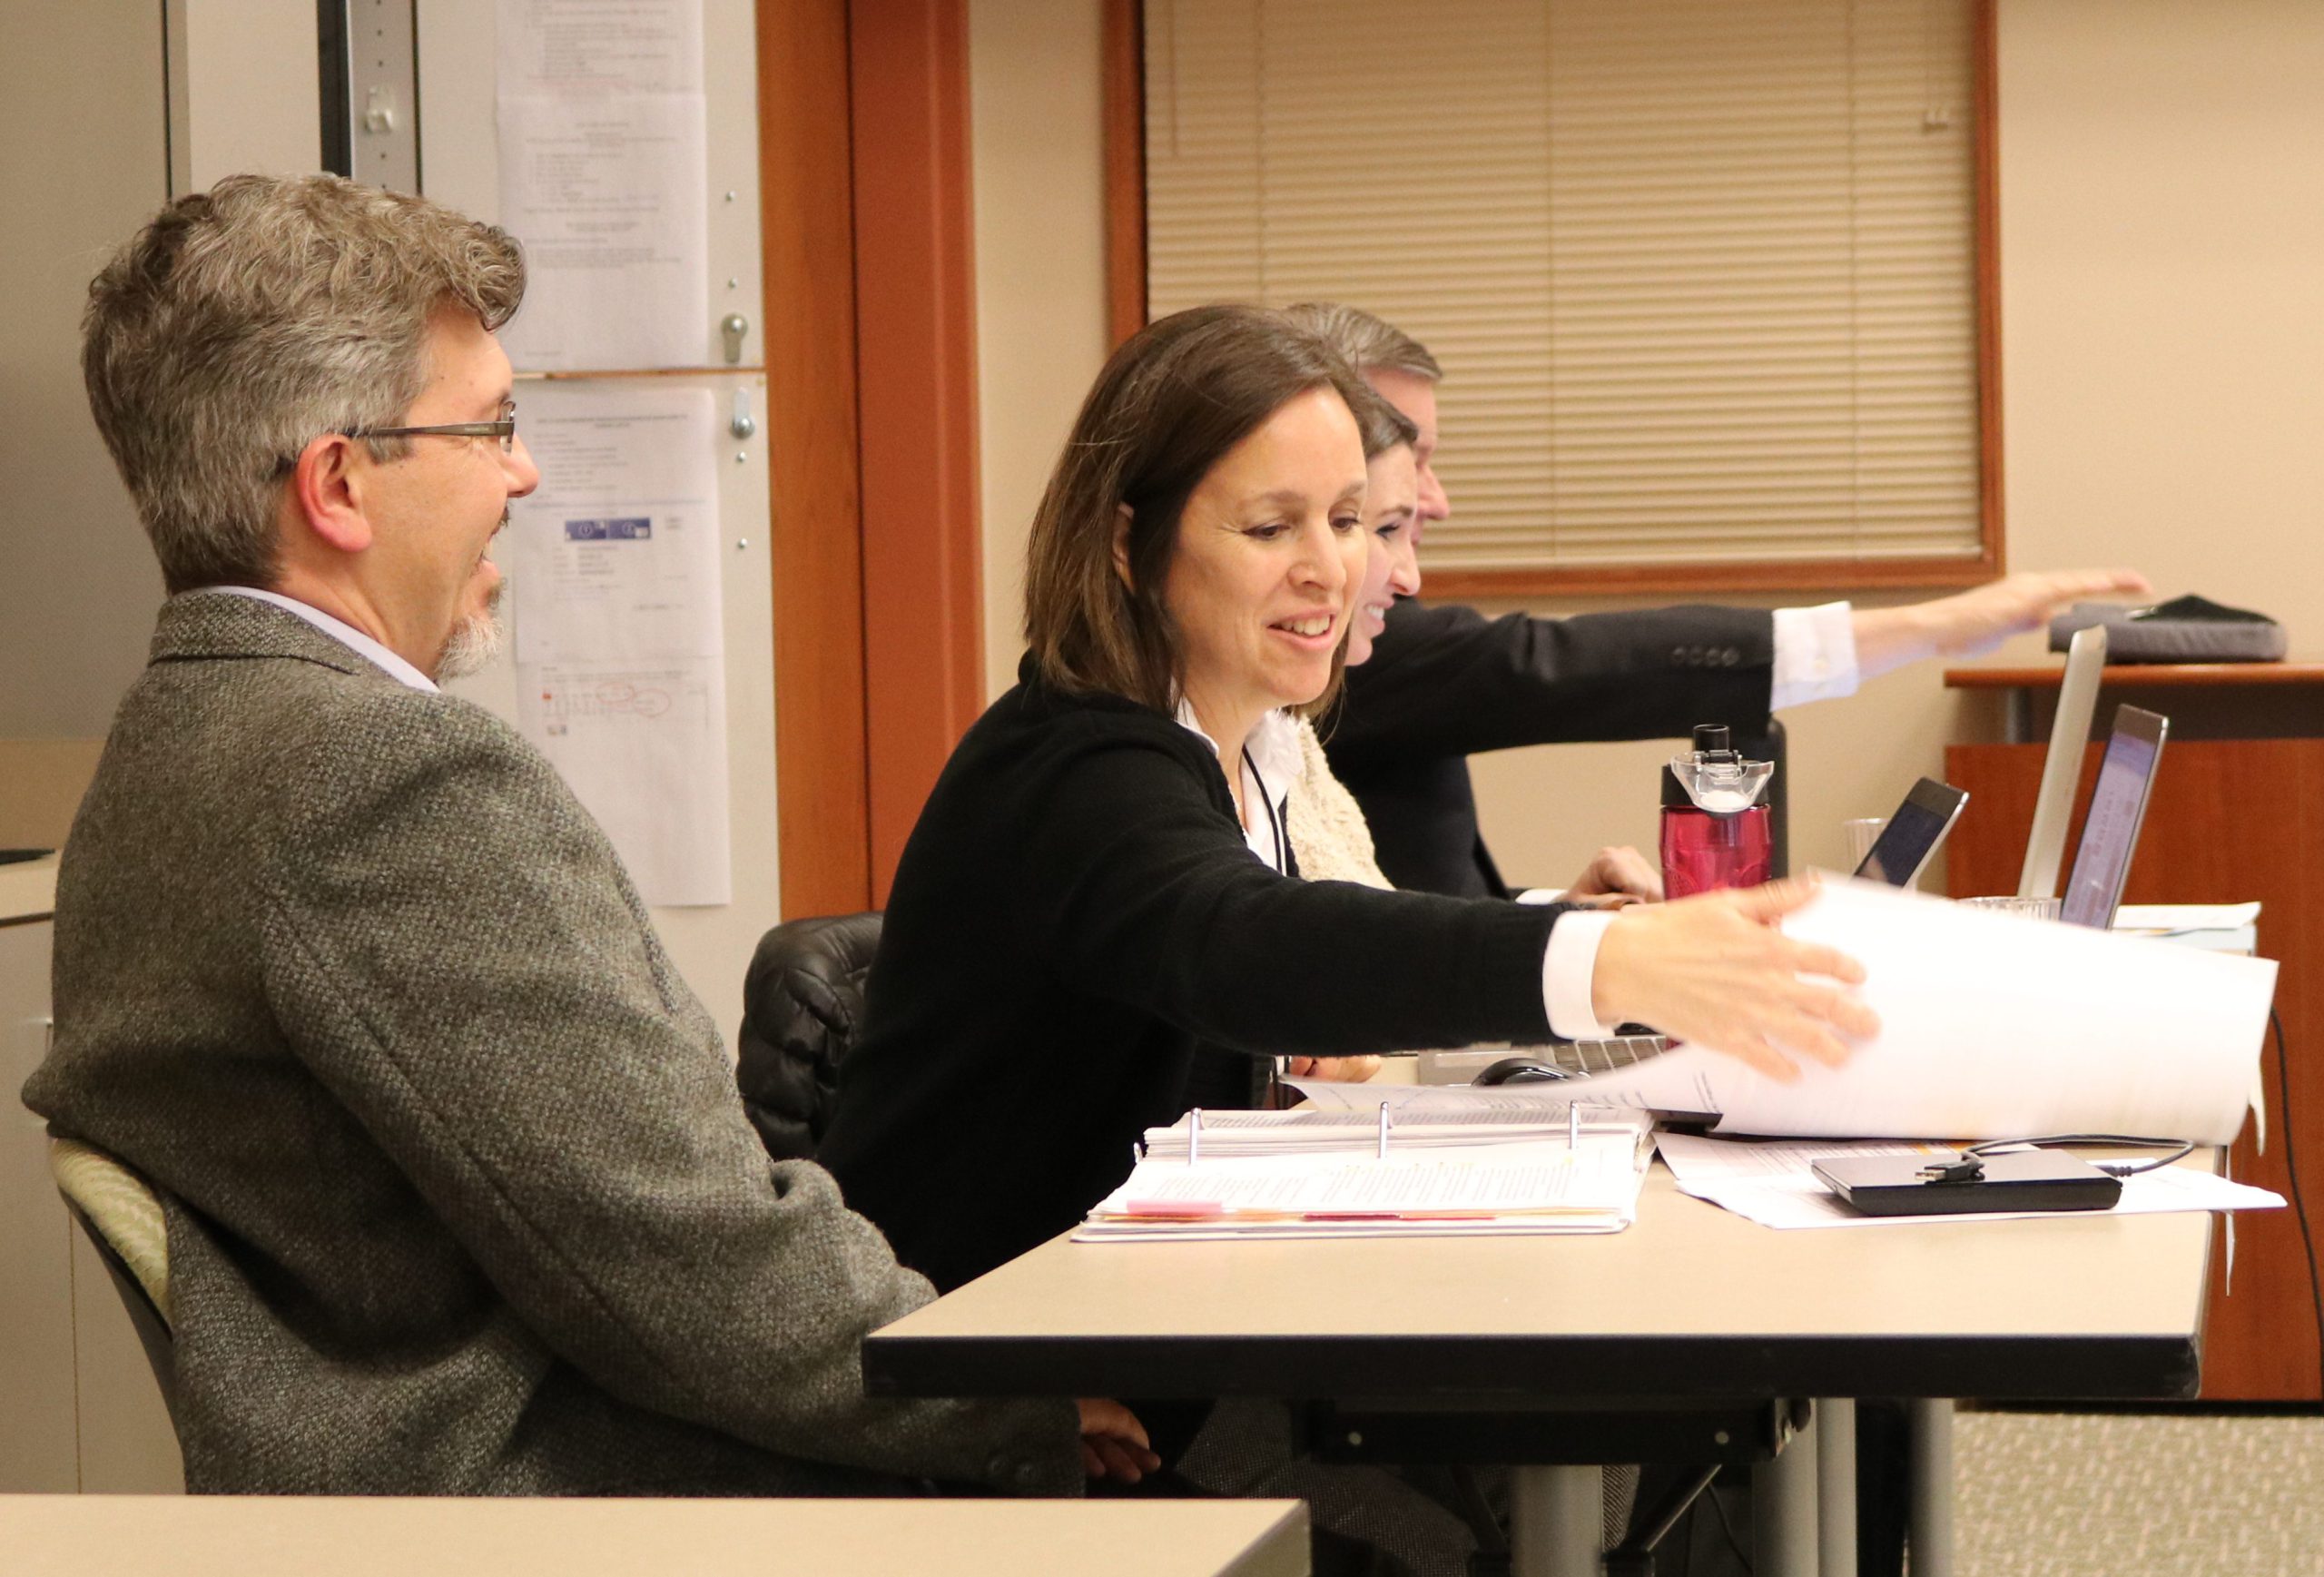 Dylan Mace, Nova Dubovik, Nicole Alder, and Paul Tonks sitting at secretary table during the February 8, 2018 State Records Committee meeting